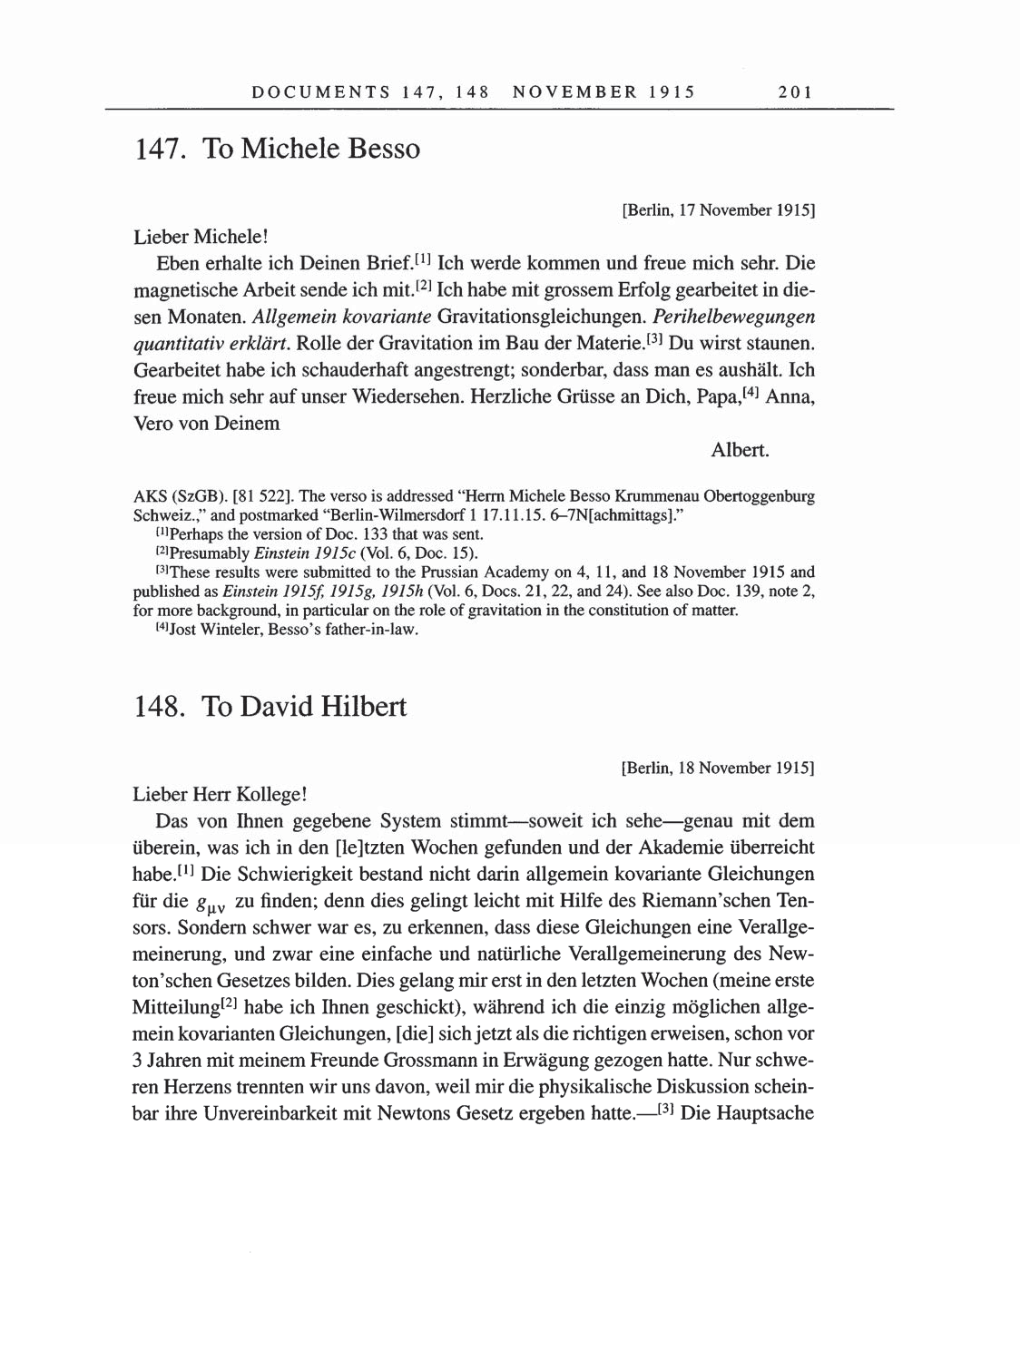 Volume 8, Part A: The Berlin Years: Correspondence 1914-1917 page 201